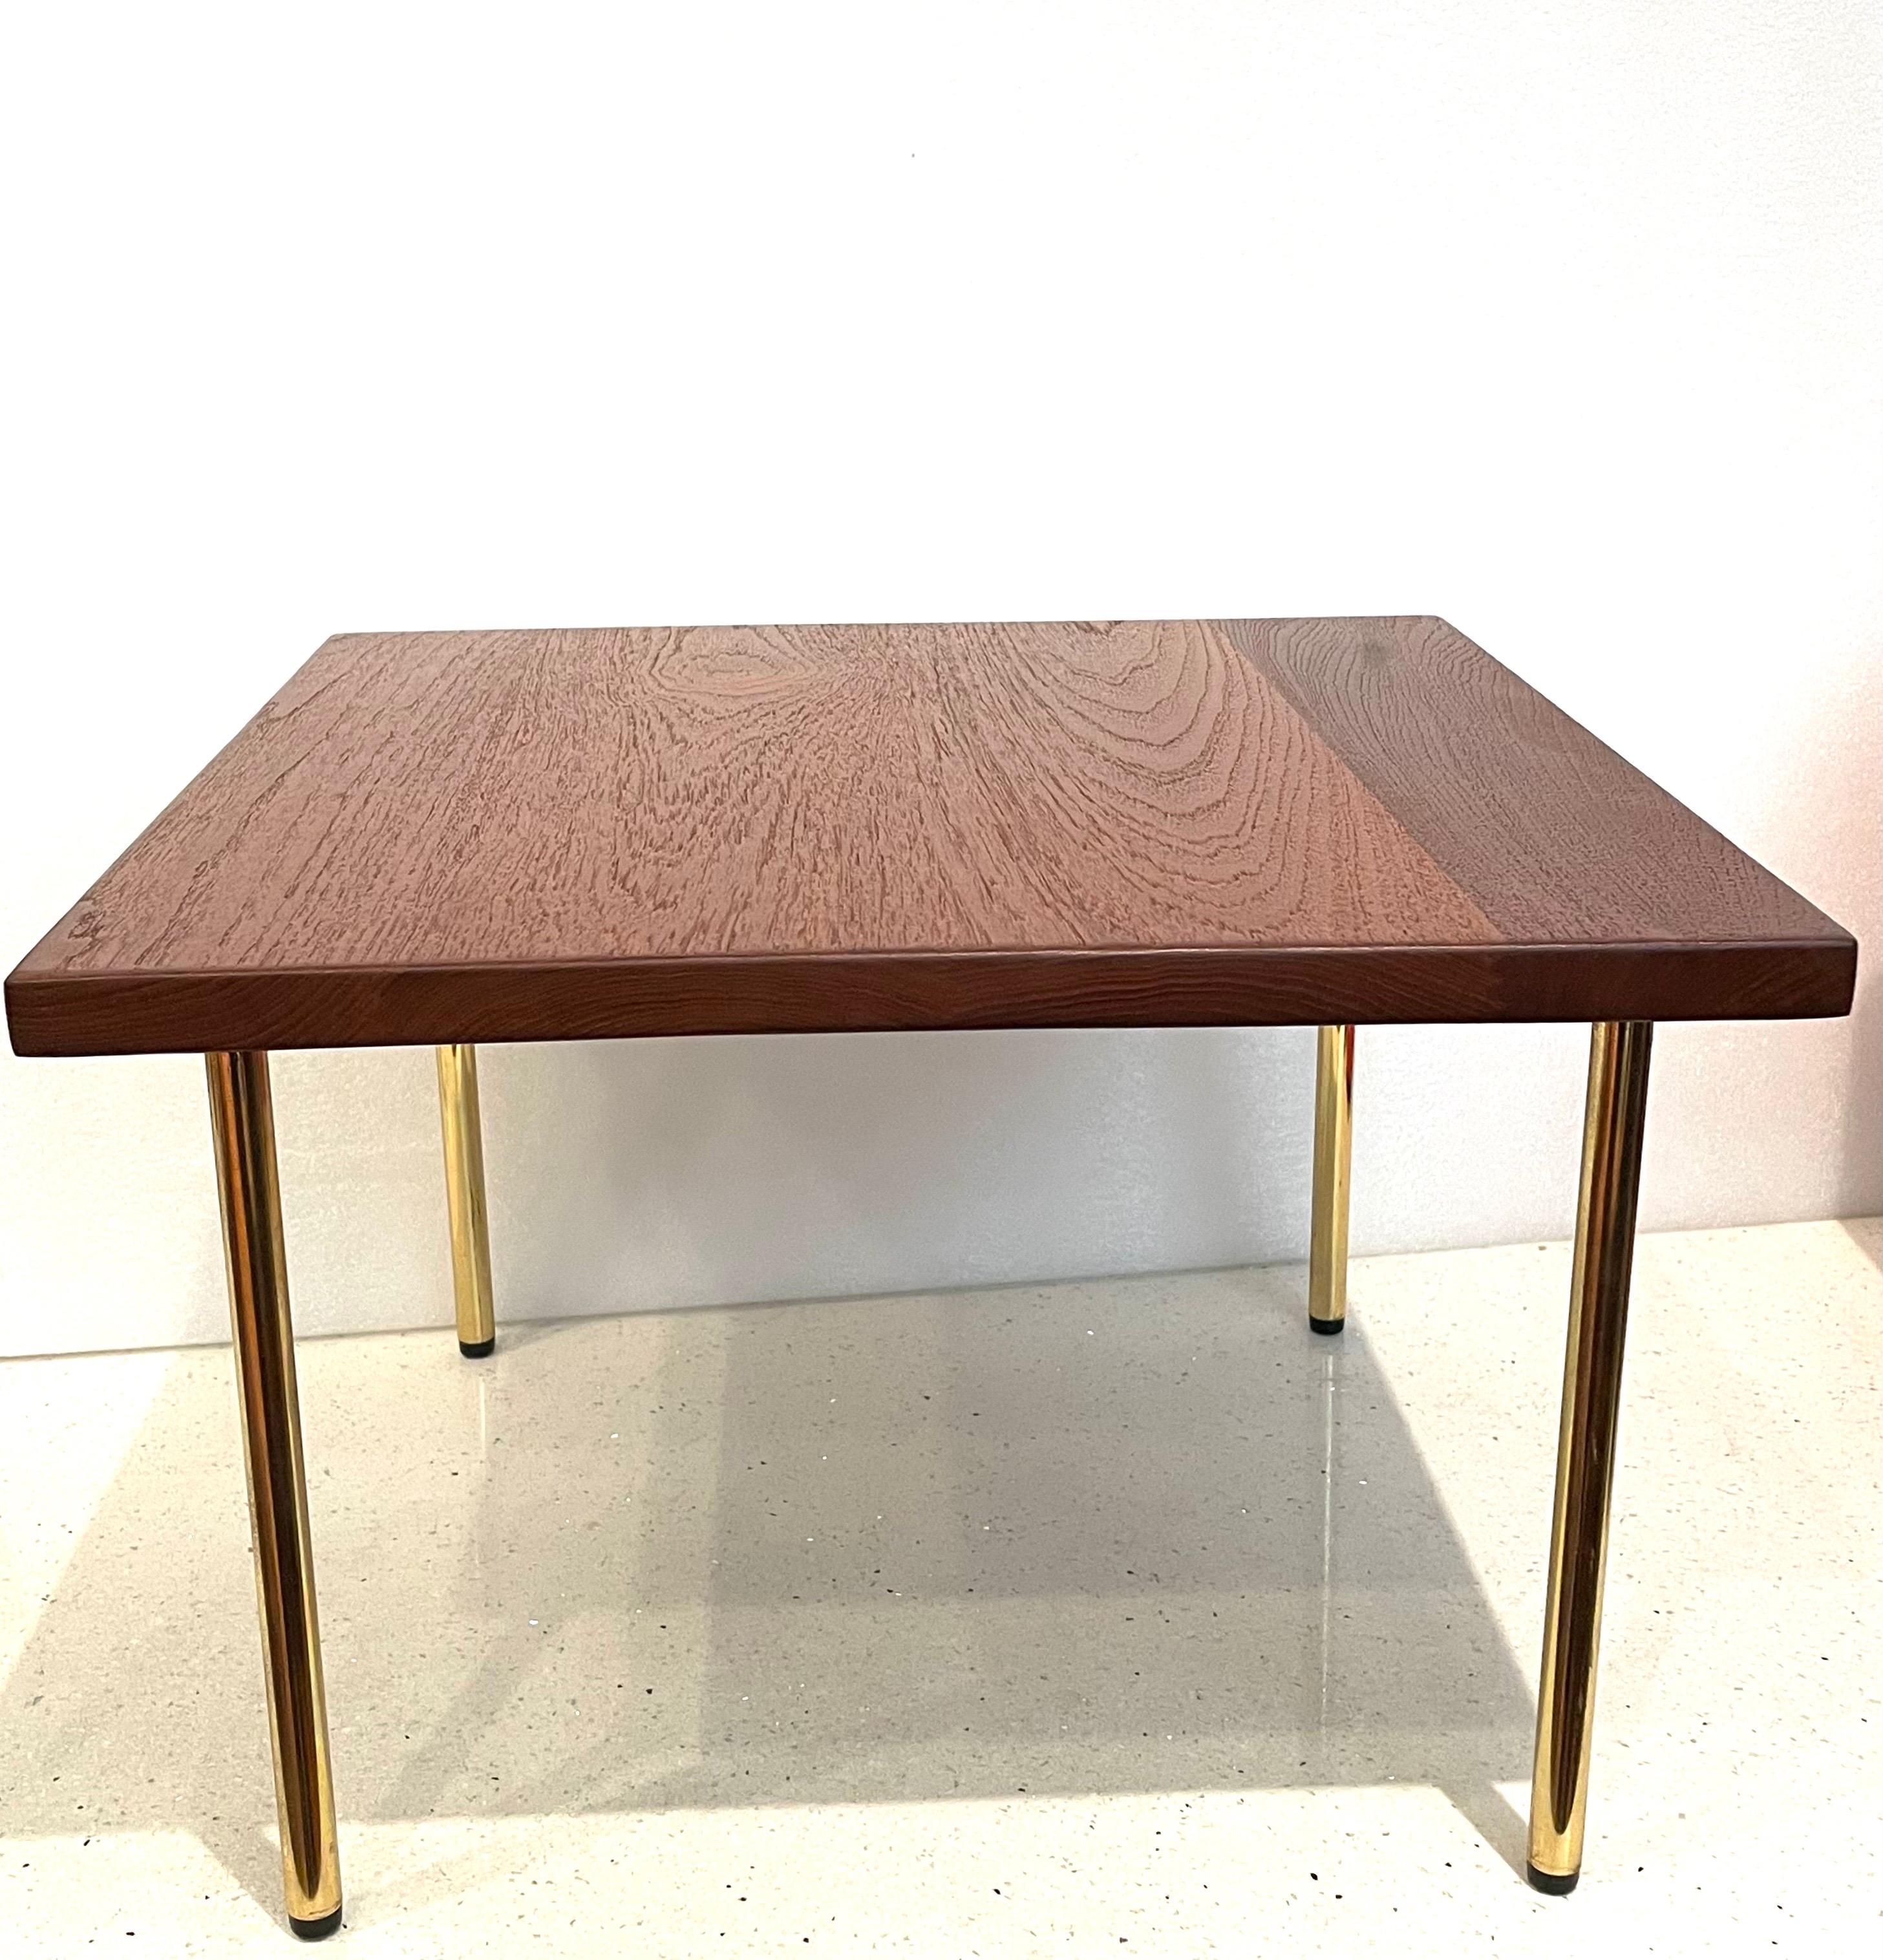 20th Century Danish Modern Solid Teak Small Table Designed by Peter Hvidt